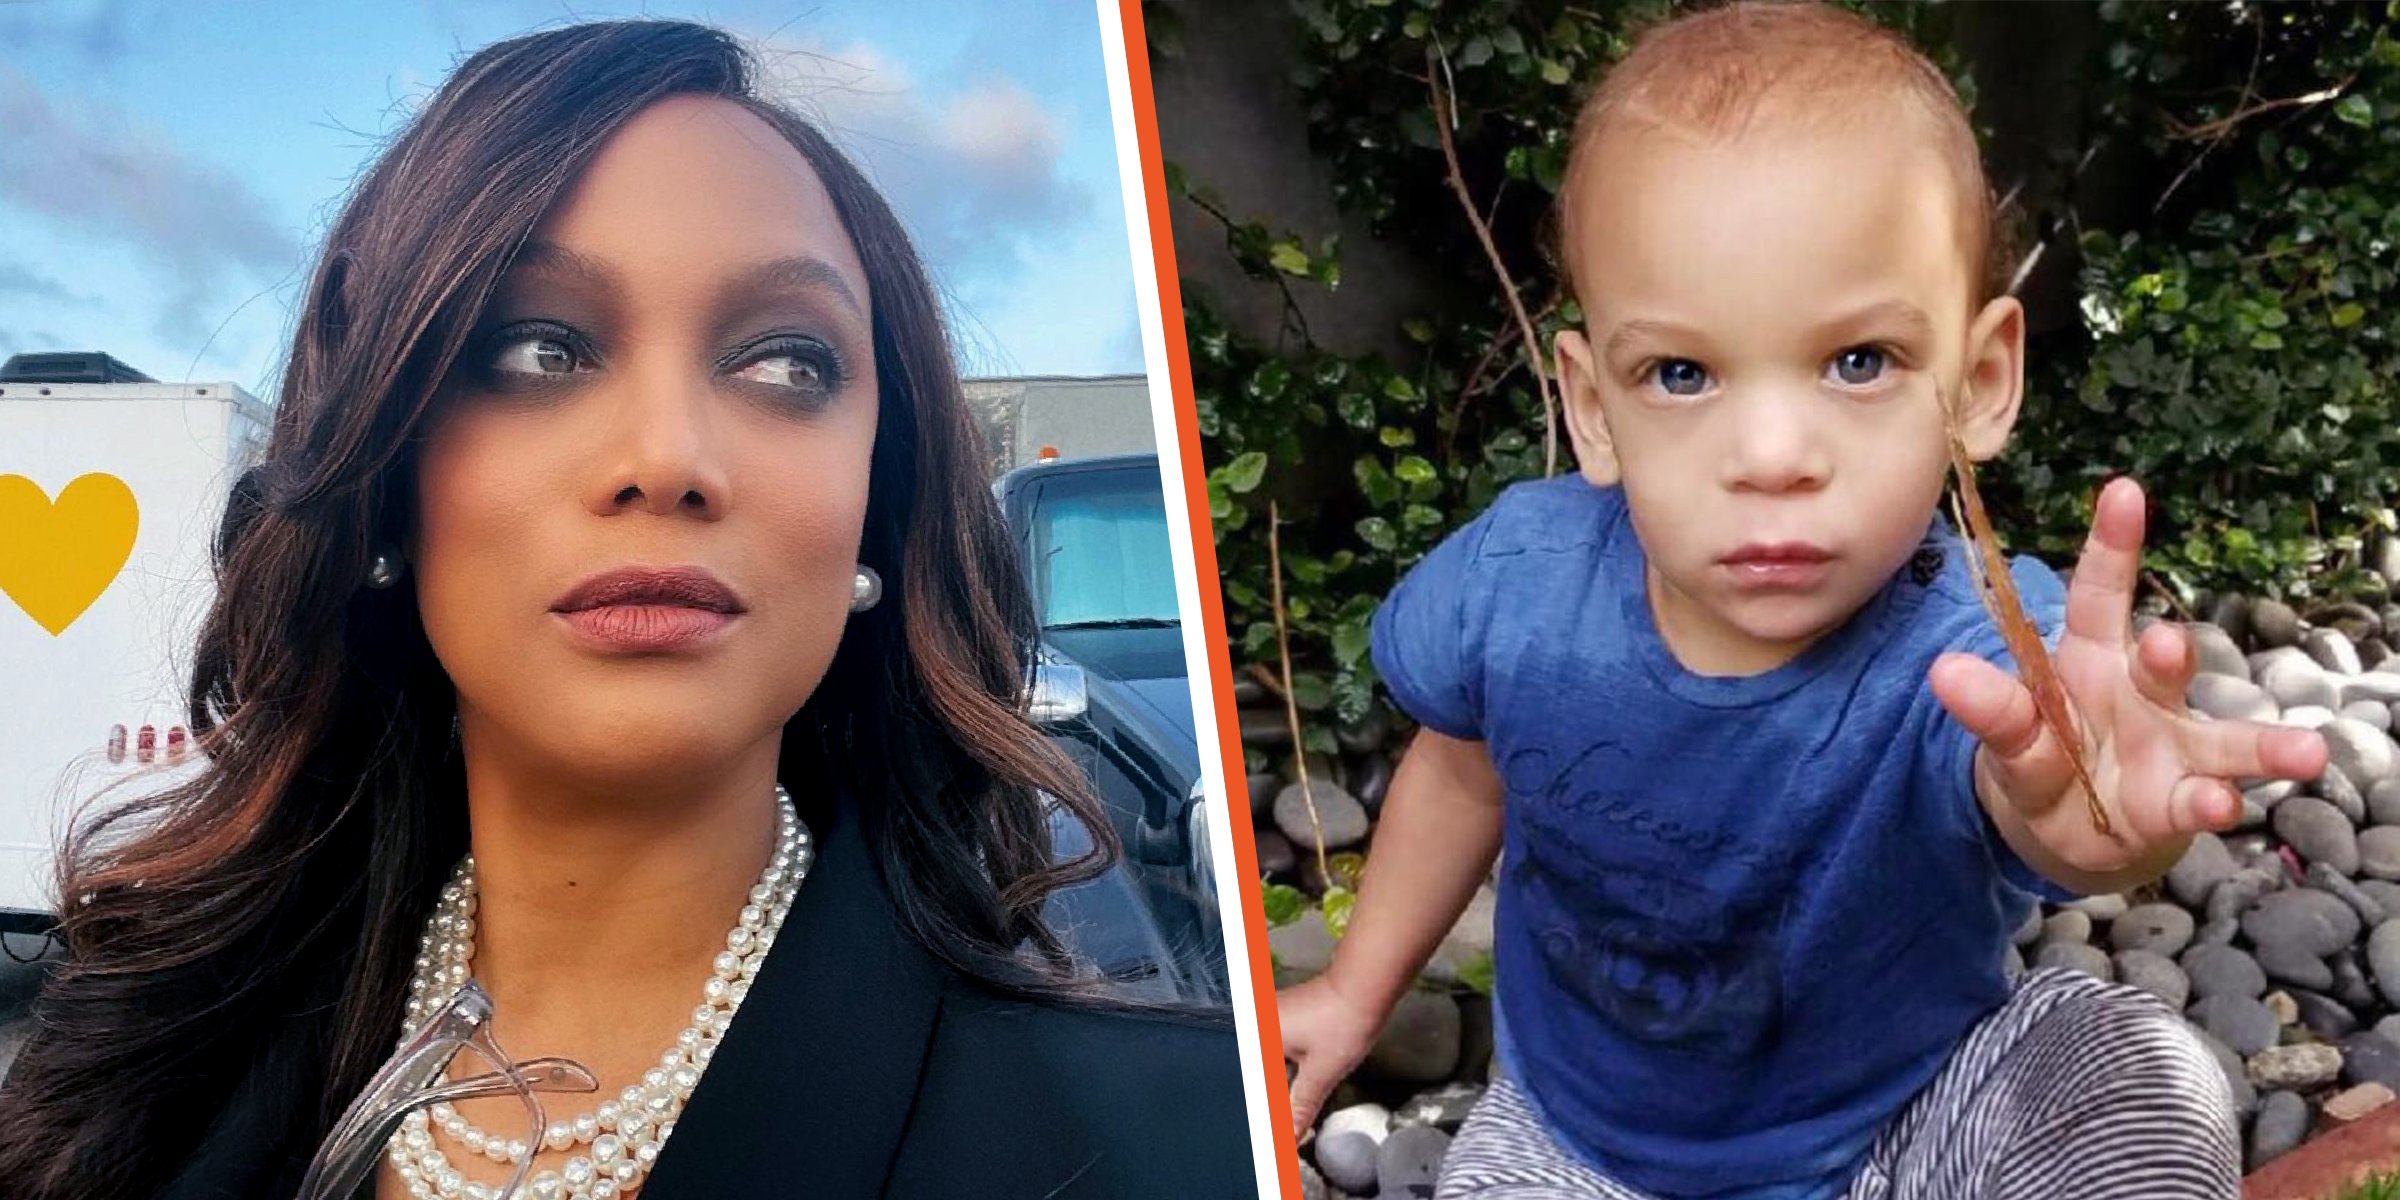 York Banks Asla Is Tyra Banks’ SixYearOld Son Facts to Know About Him